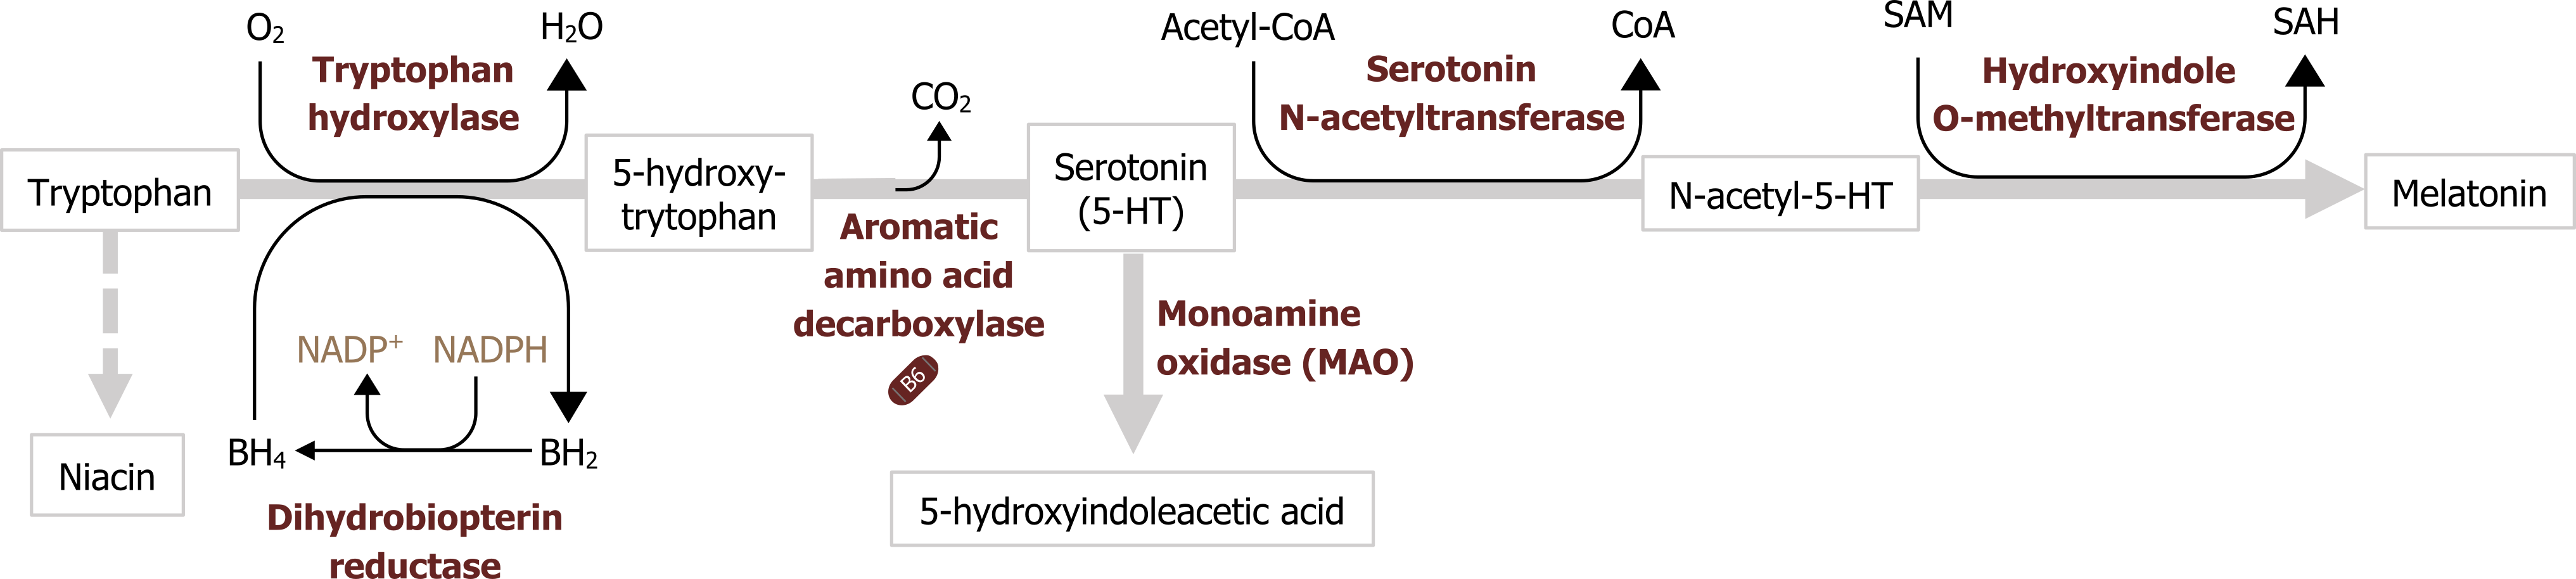 Tryptophan arrow with O2 arrow H2O, BH4 bidirectional arrow BH2, and enzyme tryptophan hydroxylase to 5-hydroxy-tryptophan arrow with CO2 loss and enzyme aromatic amino acid decarboxylase to serotonin (5-HT) arrow with acetyl-CoA arrow CoA and enzyme serotonin N-acetyltransferase to N-acetyl-5-HT arrow with SAM arrow SAH and enzyme Hydroxyindole O-methyltransferase to melatonin. Tryptophan arrow niacin. Serotonin (5-HT) arrow 5-hydroxyindoleacetic acid. BH2 arrow with NADPH arrow NADP+ and enzyme dihydrobiopterin reductase to BH4.